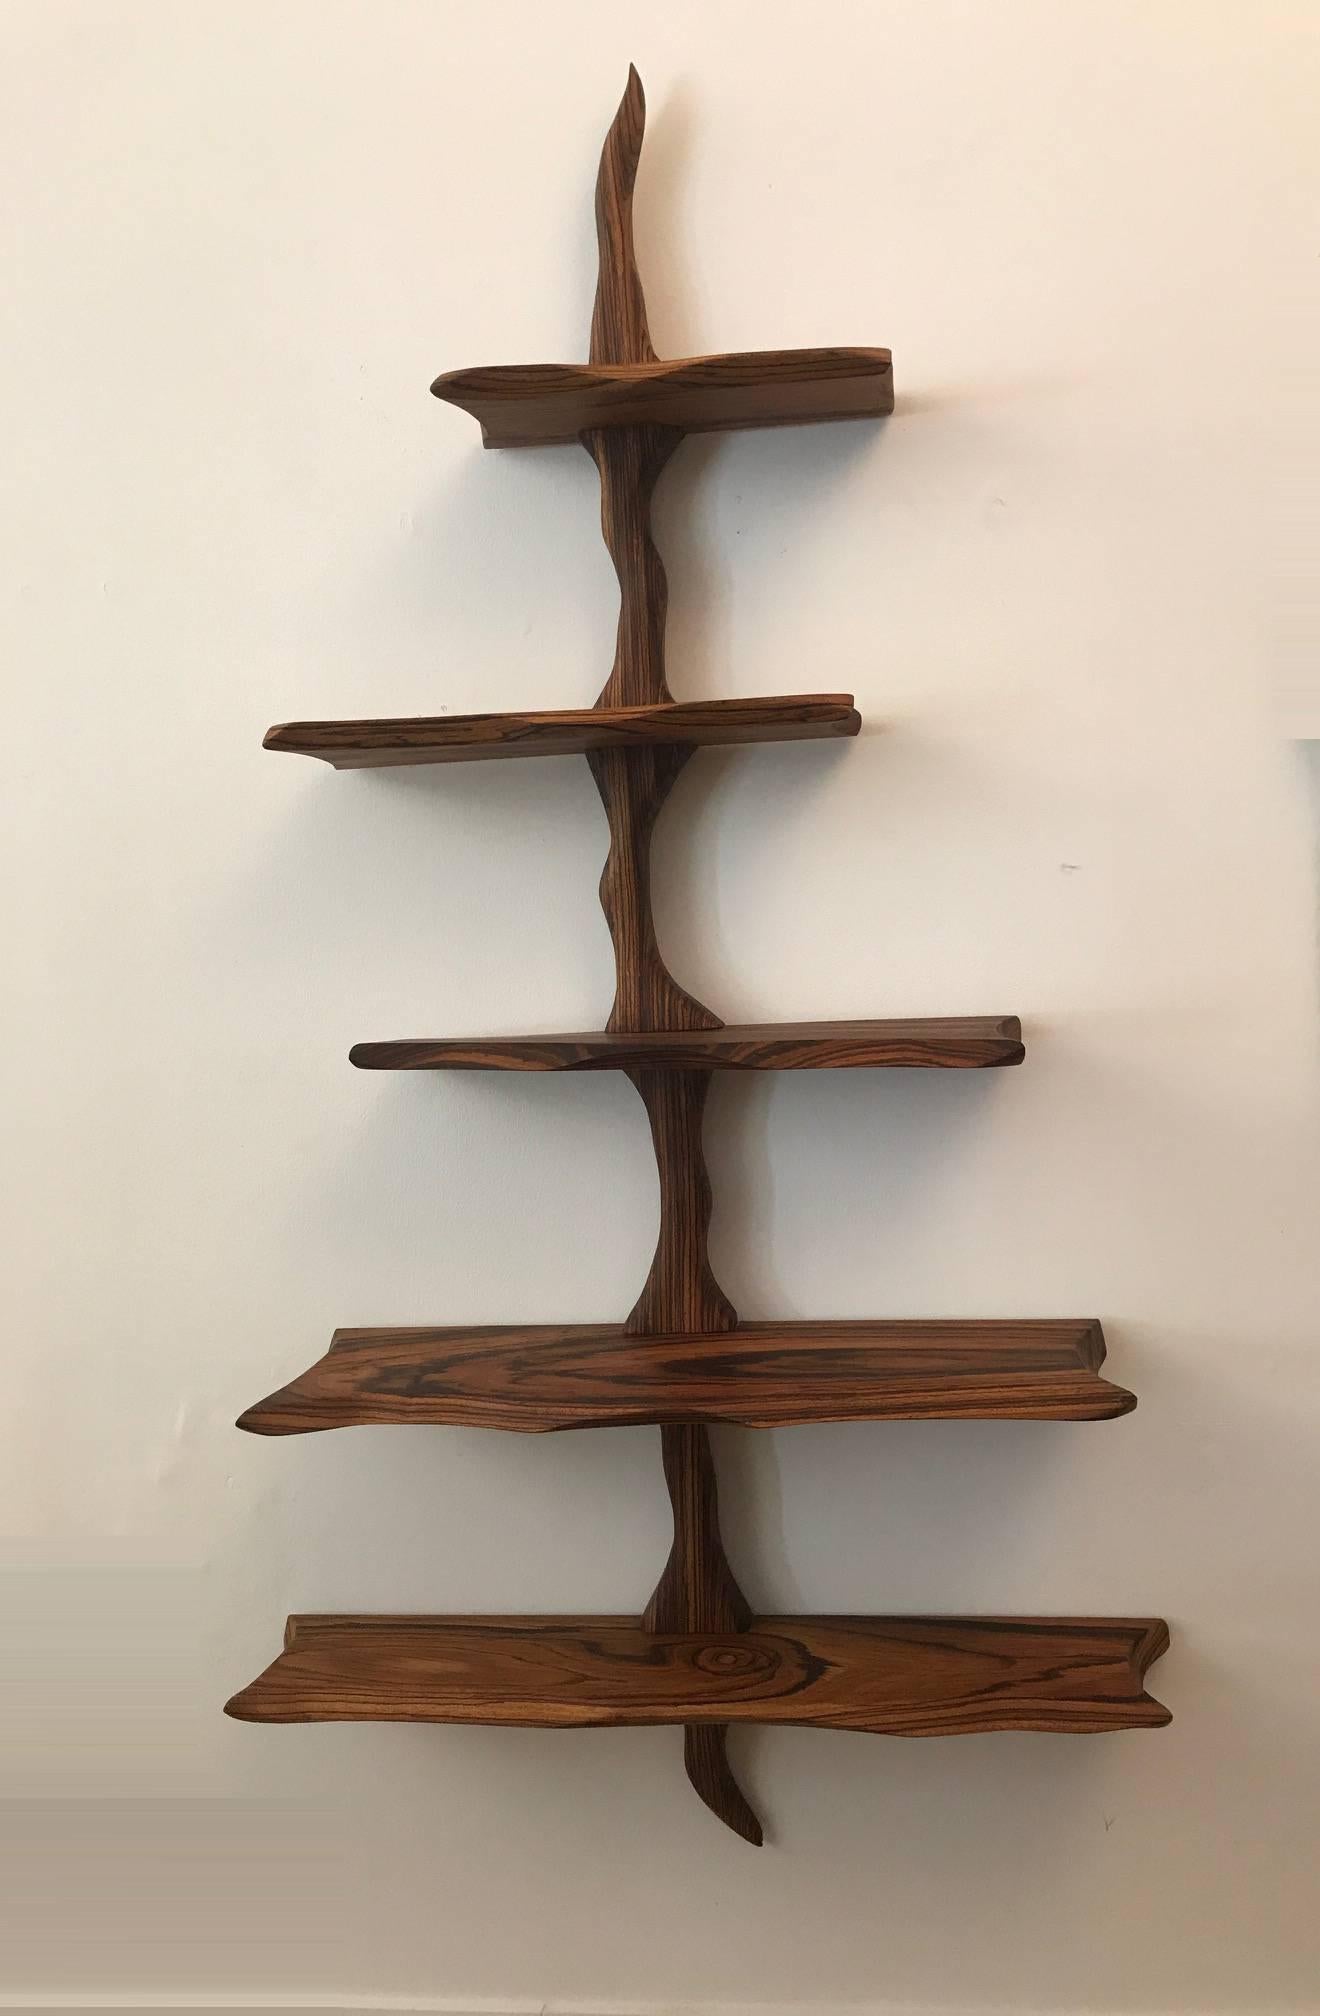 Free-form studio craft sculpted exotic wood wall hanging shelves.